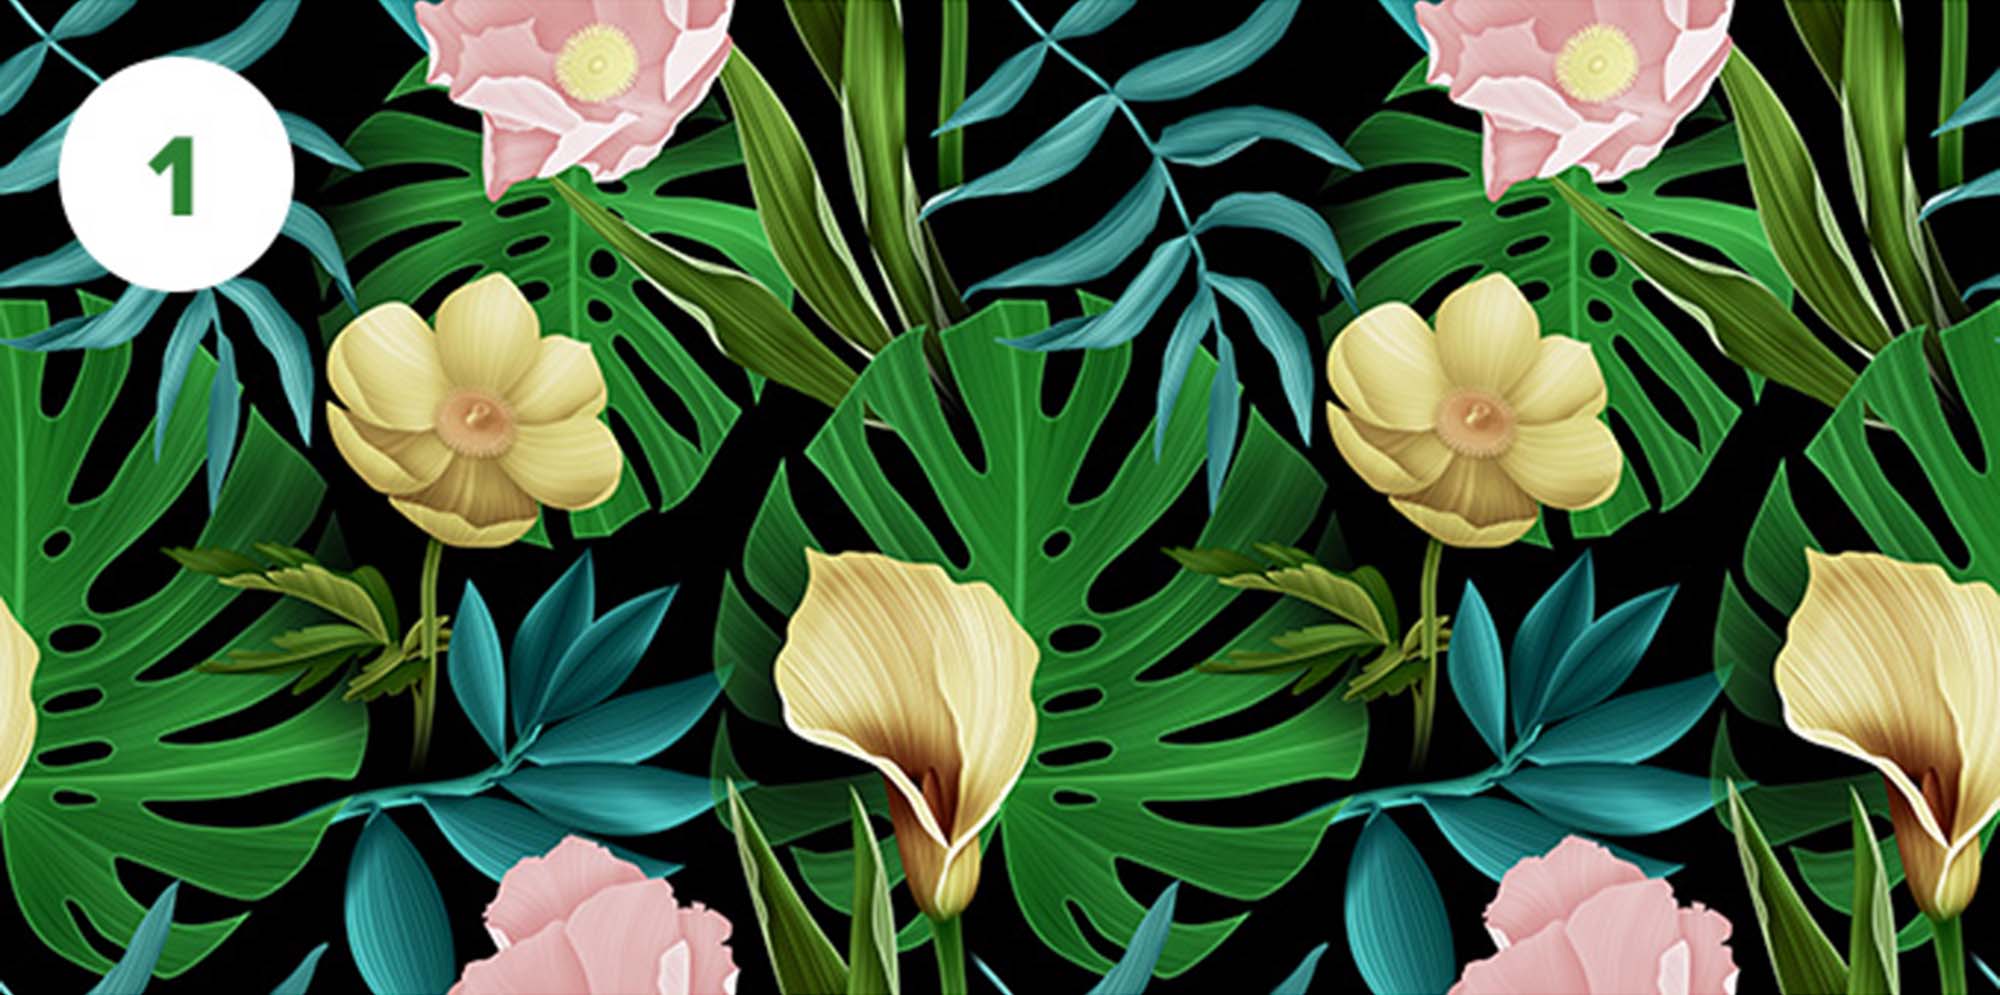 Seamless Floral Patterns